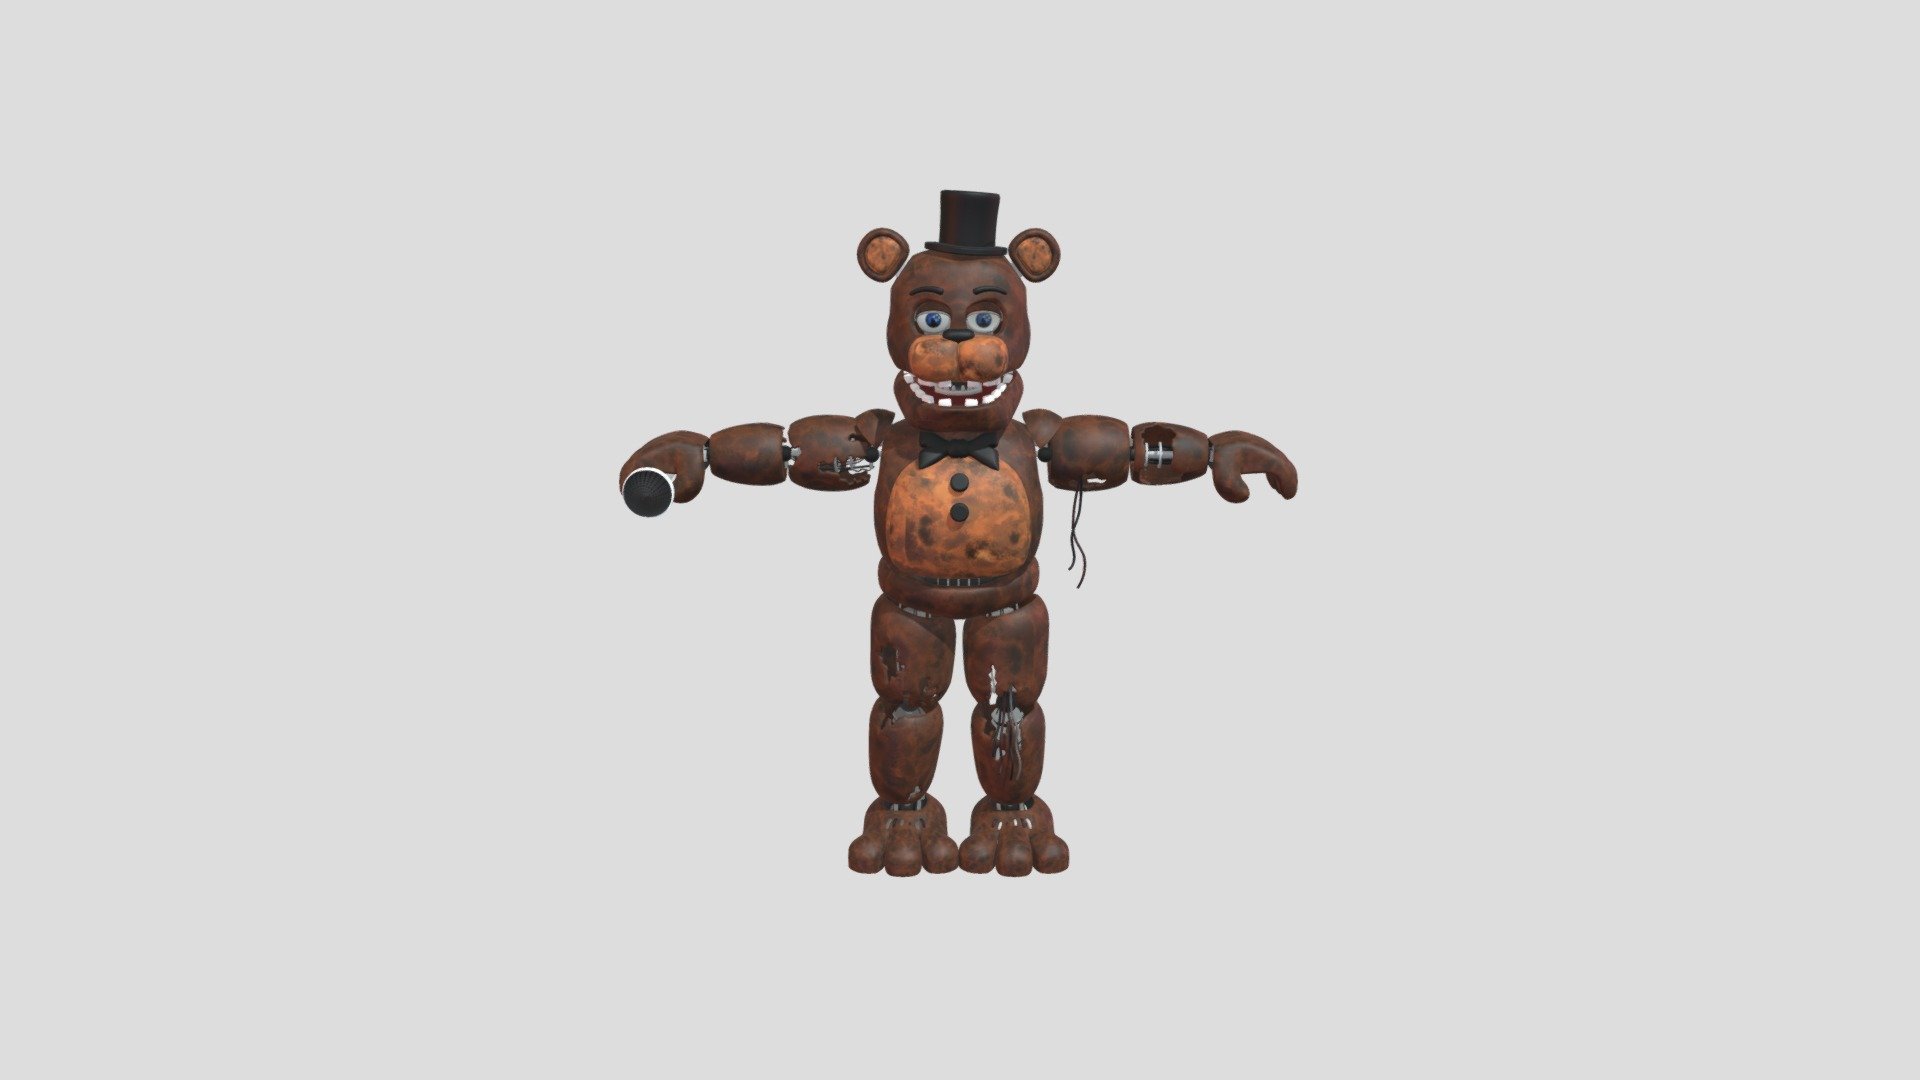 Withered Freddy By Thudner (Blender version)